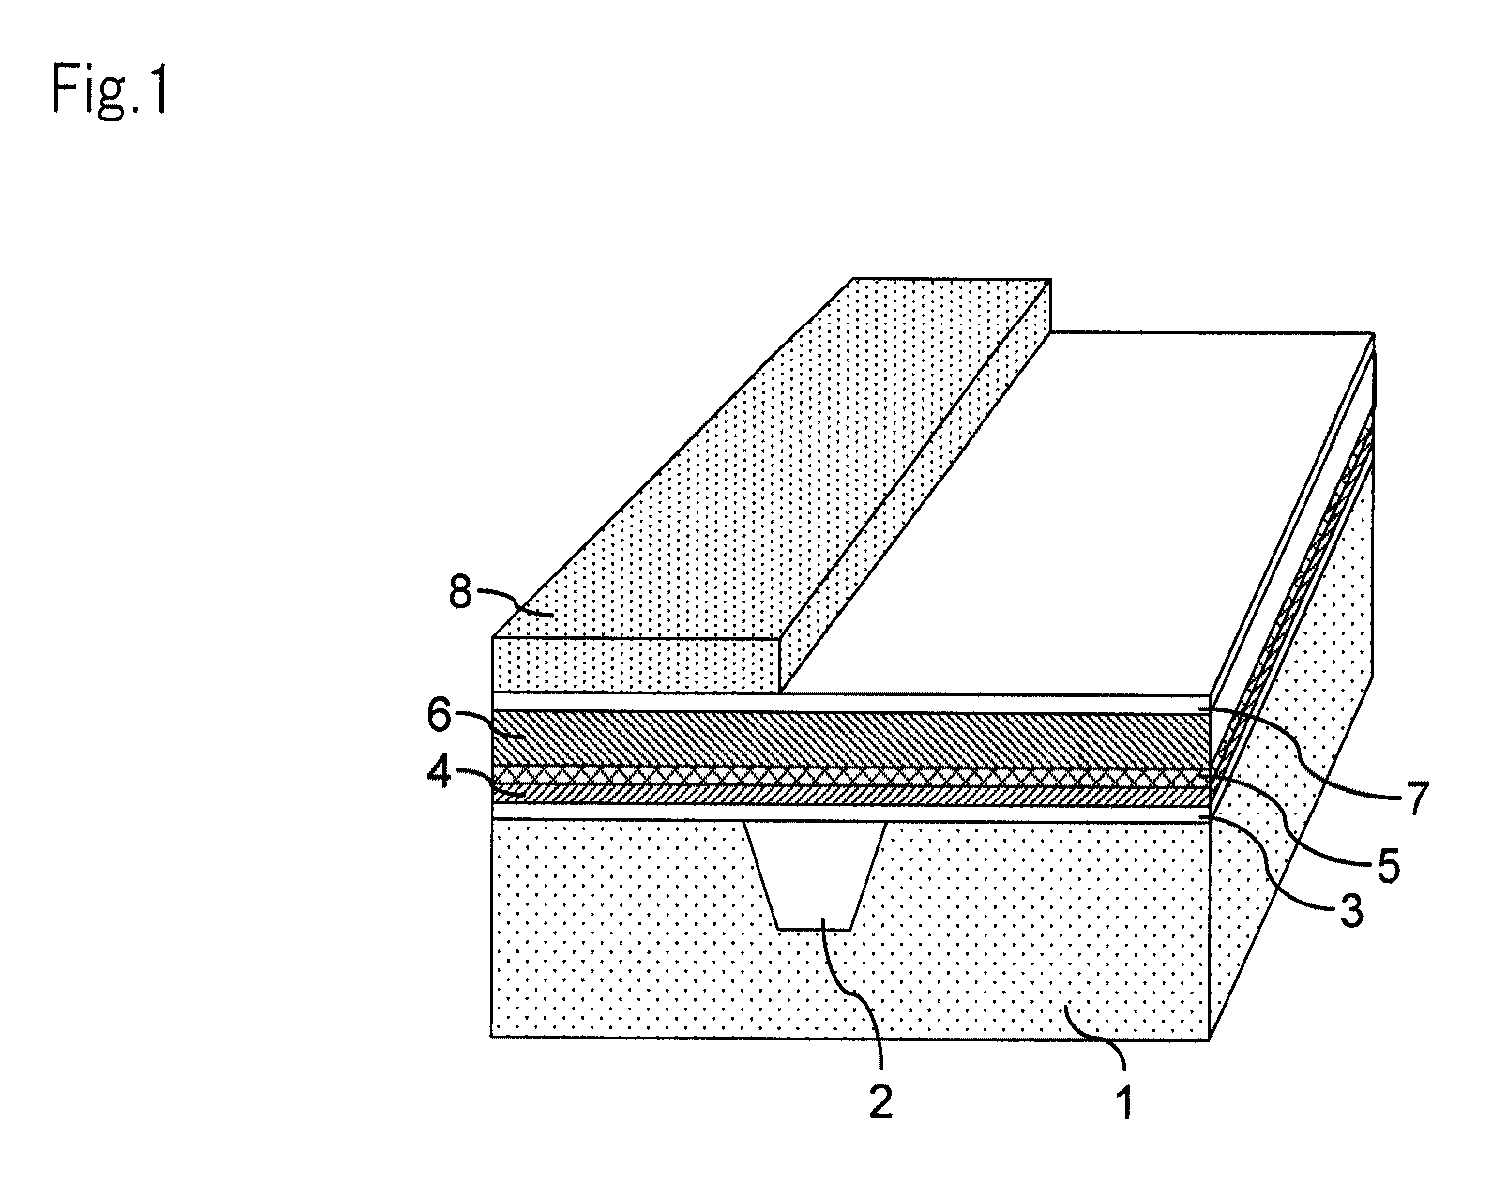 Border between semiconductor transistors with different gate structures